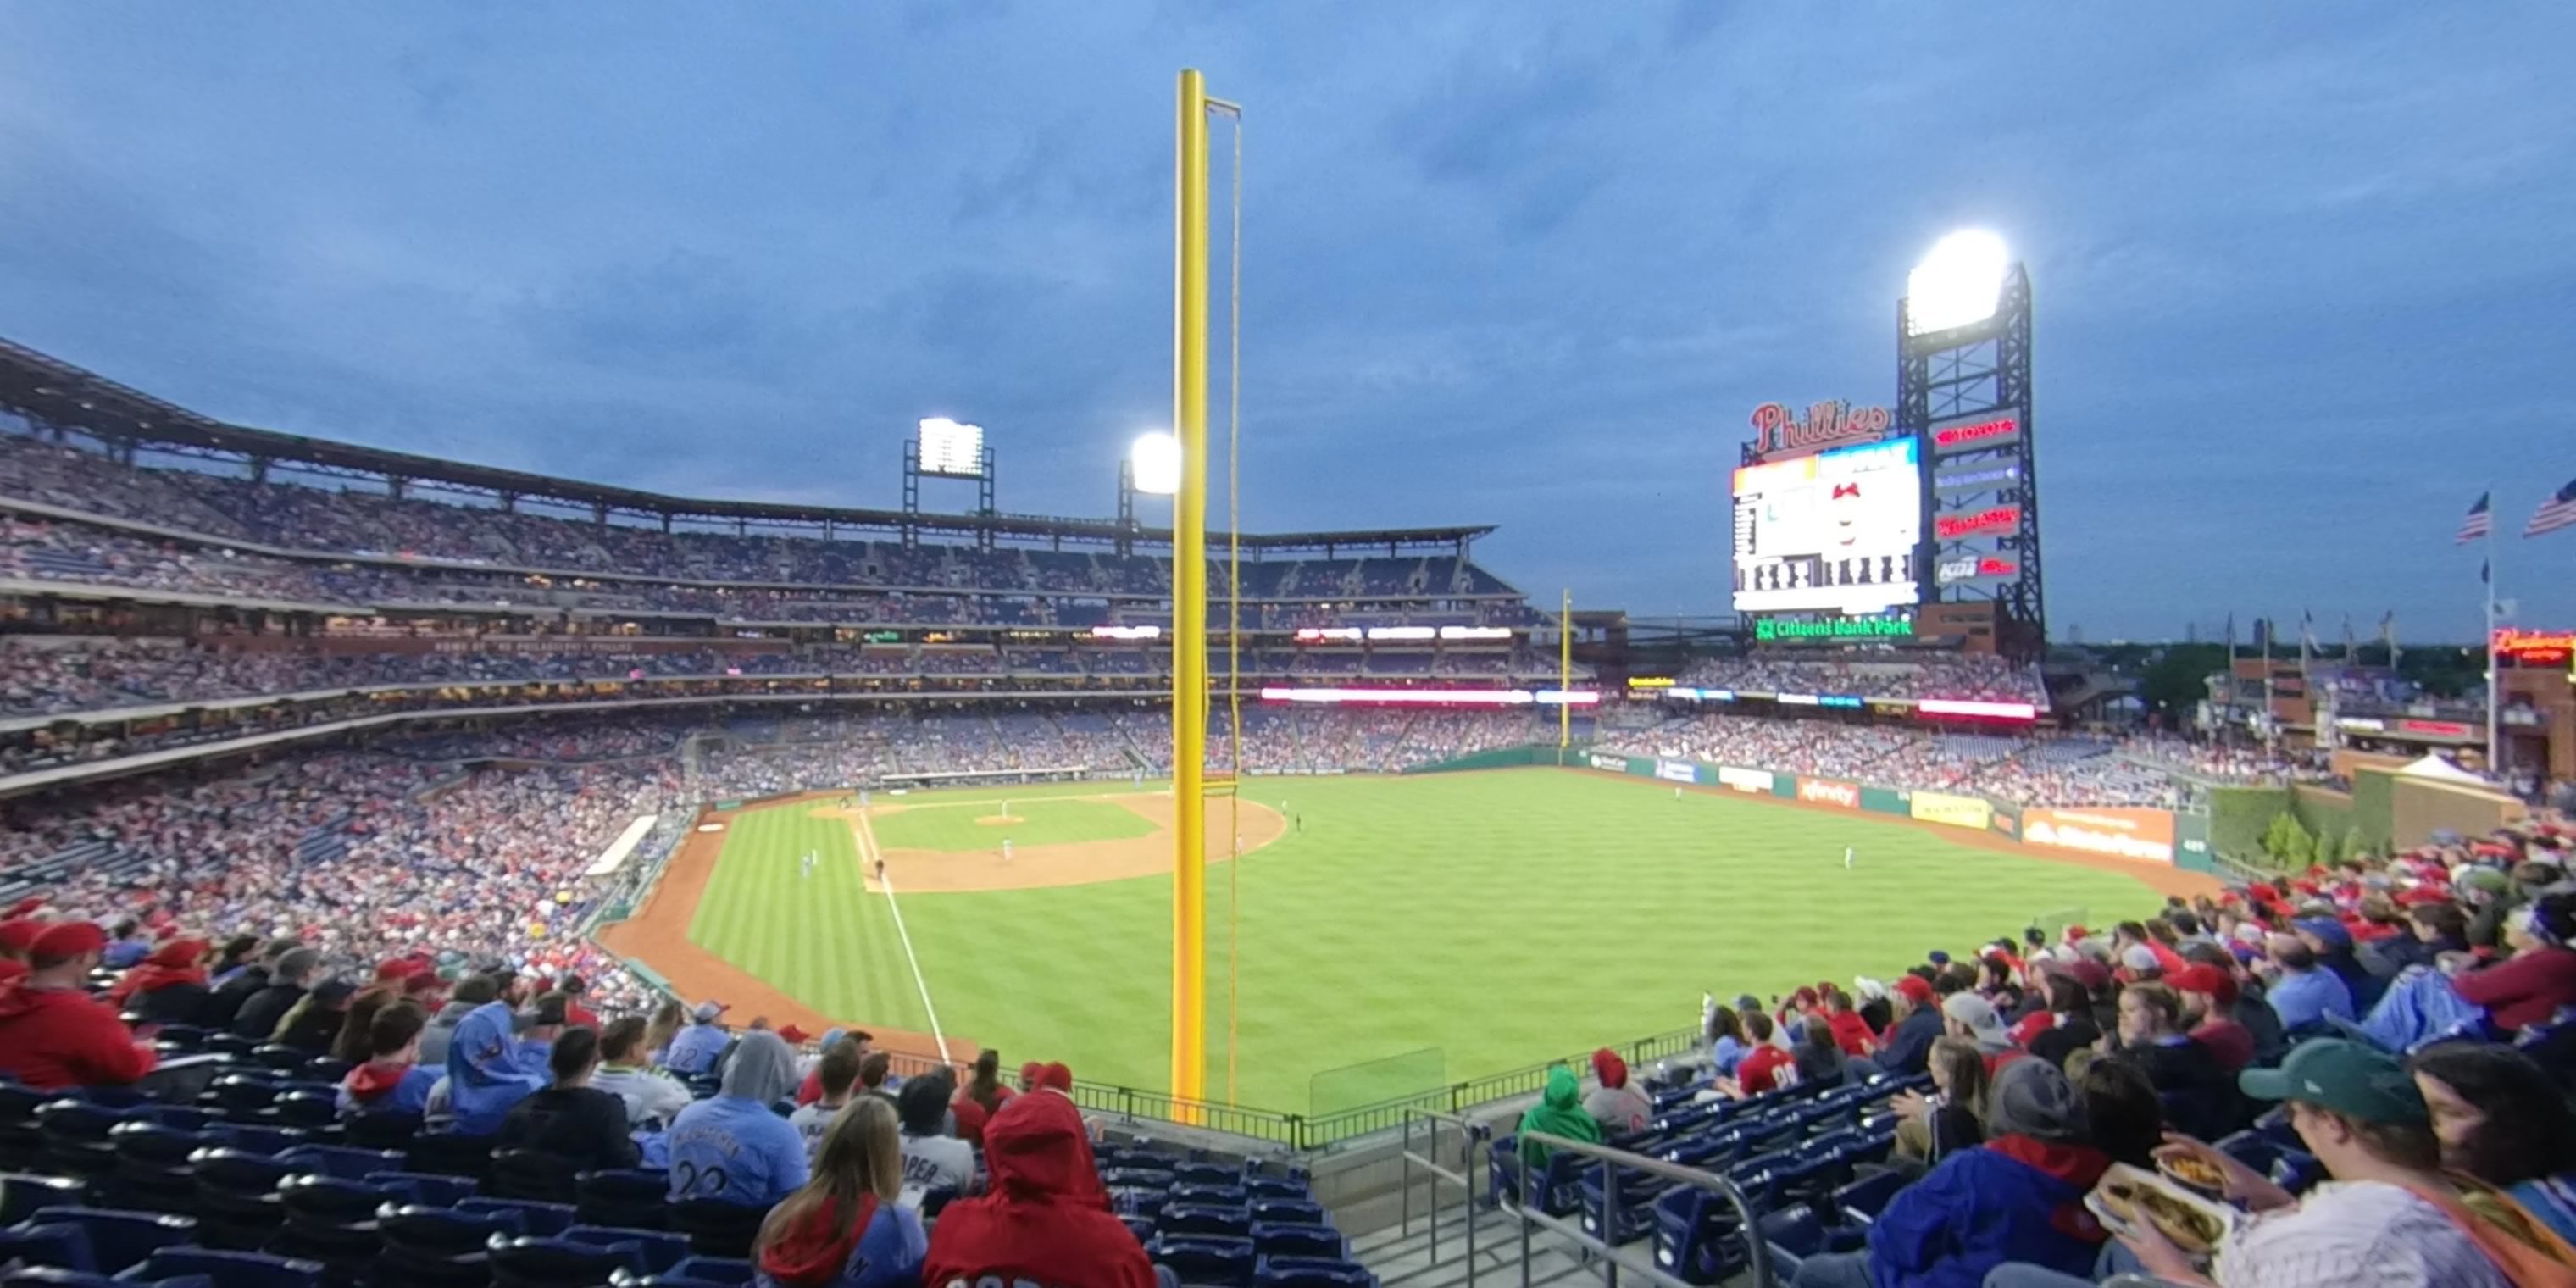 section 205 panoramic seat view  for baseball - citizens bank park